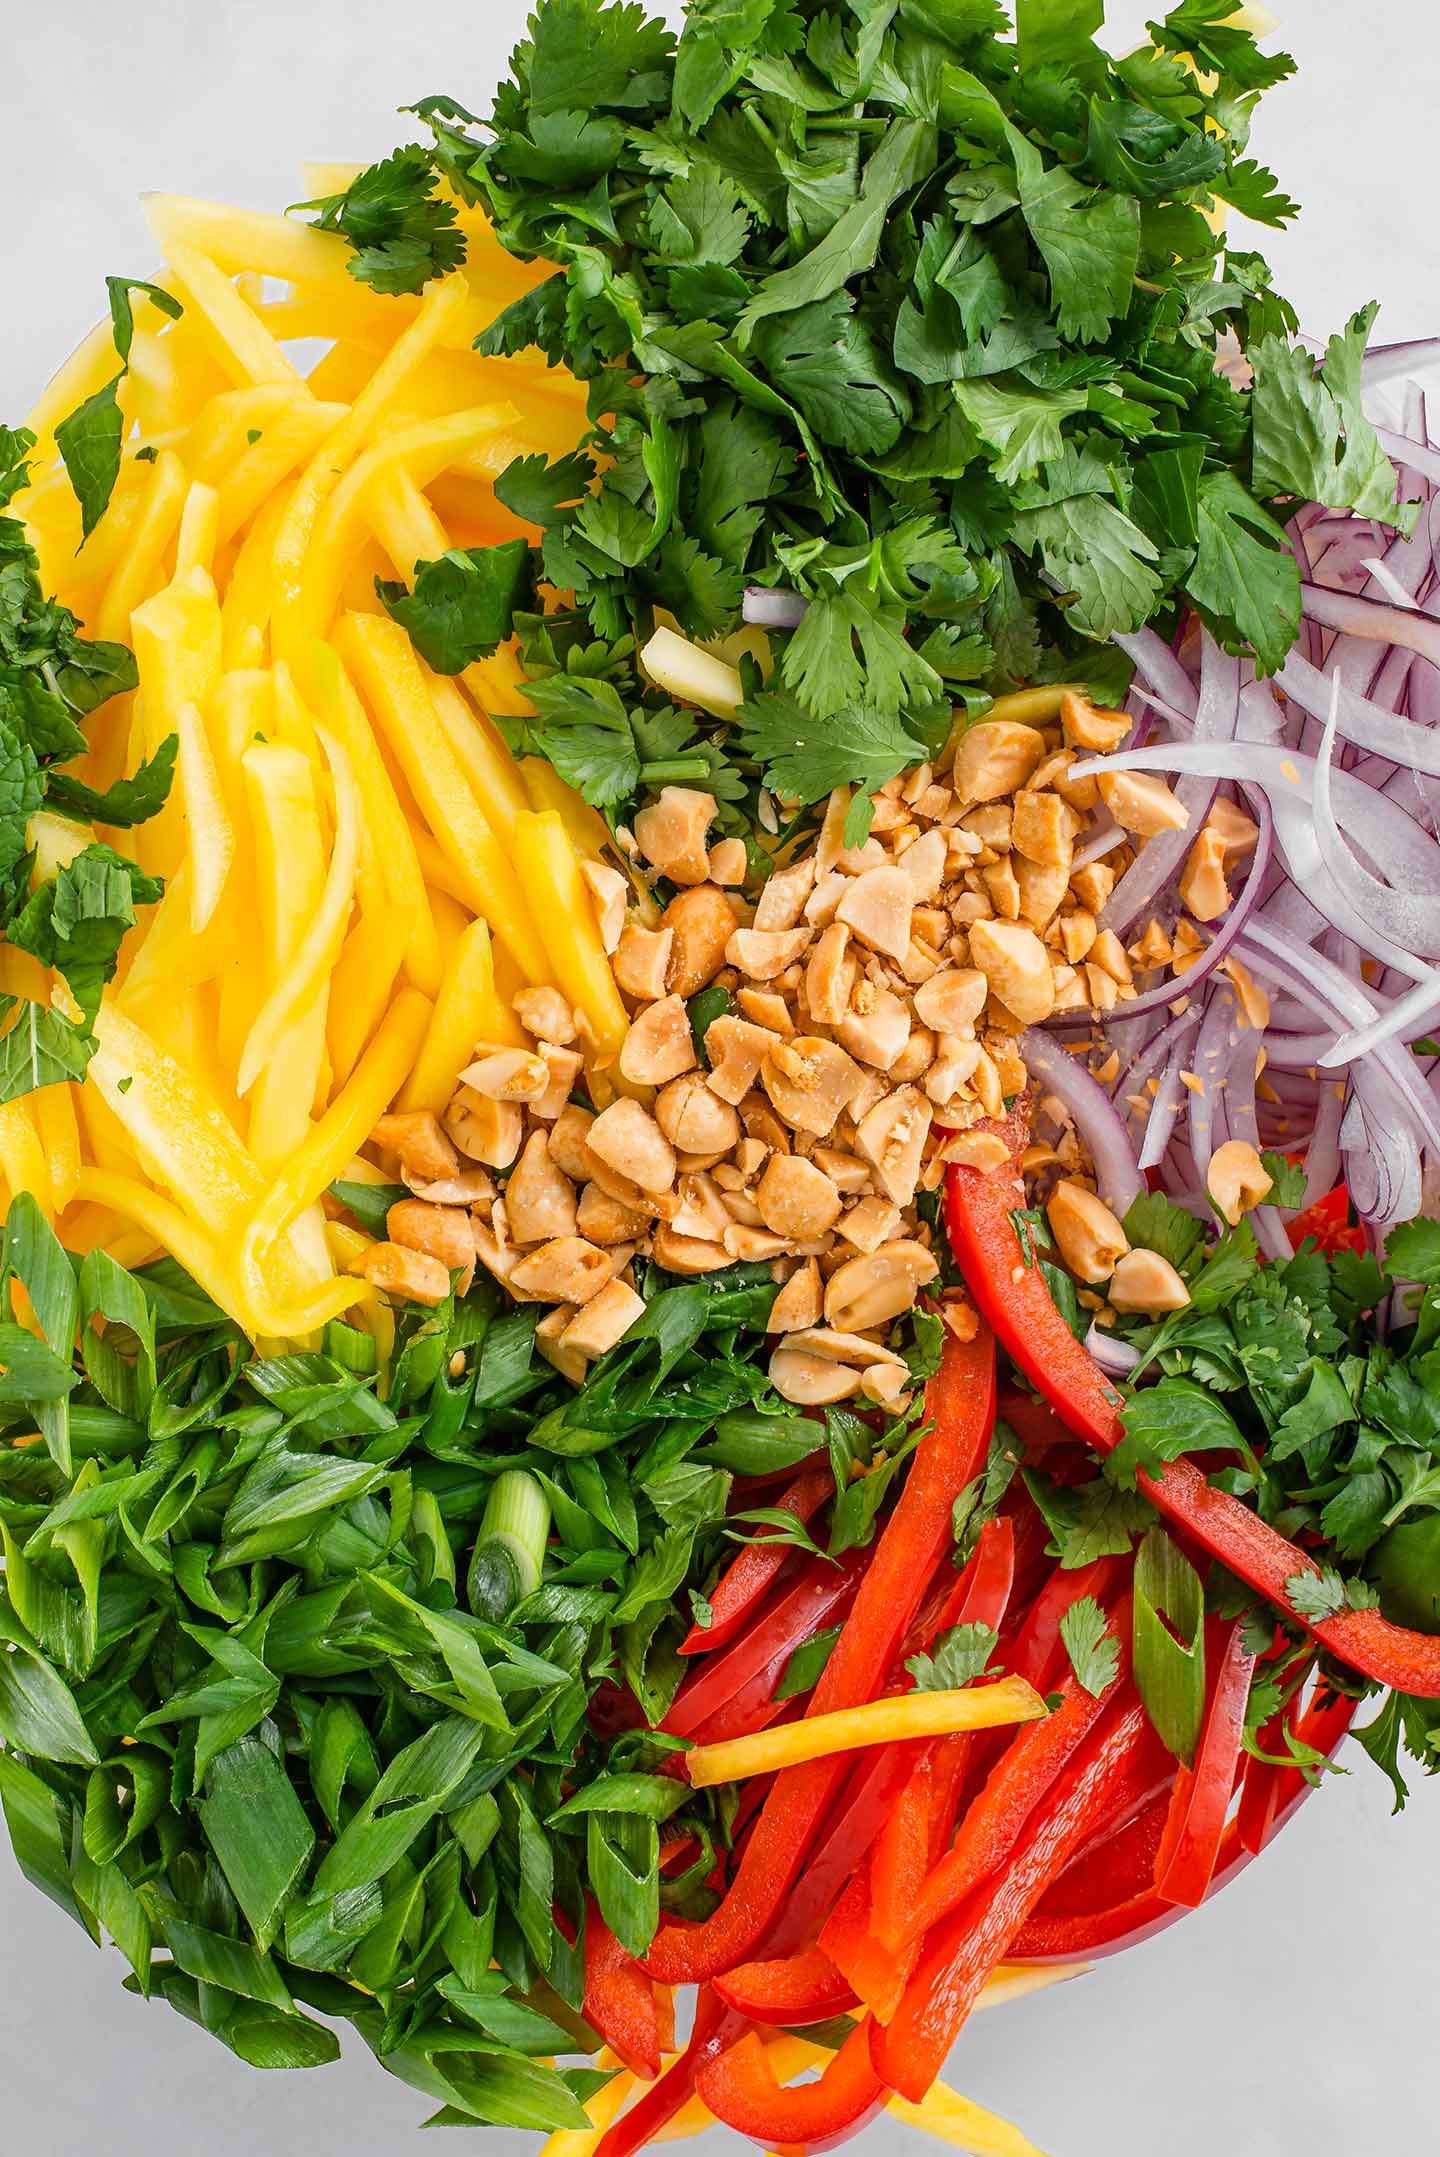 Top down view of colourful sliced mango salad ingredients in a bowl. Ripe mango, red pepper, red onion, green onion, mint, cilantro, and peanuts.